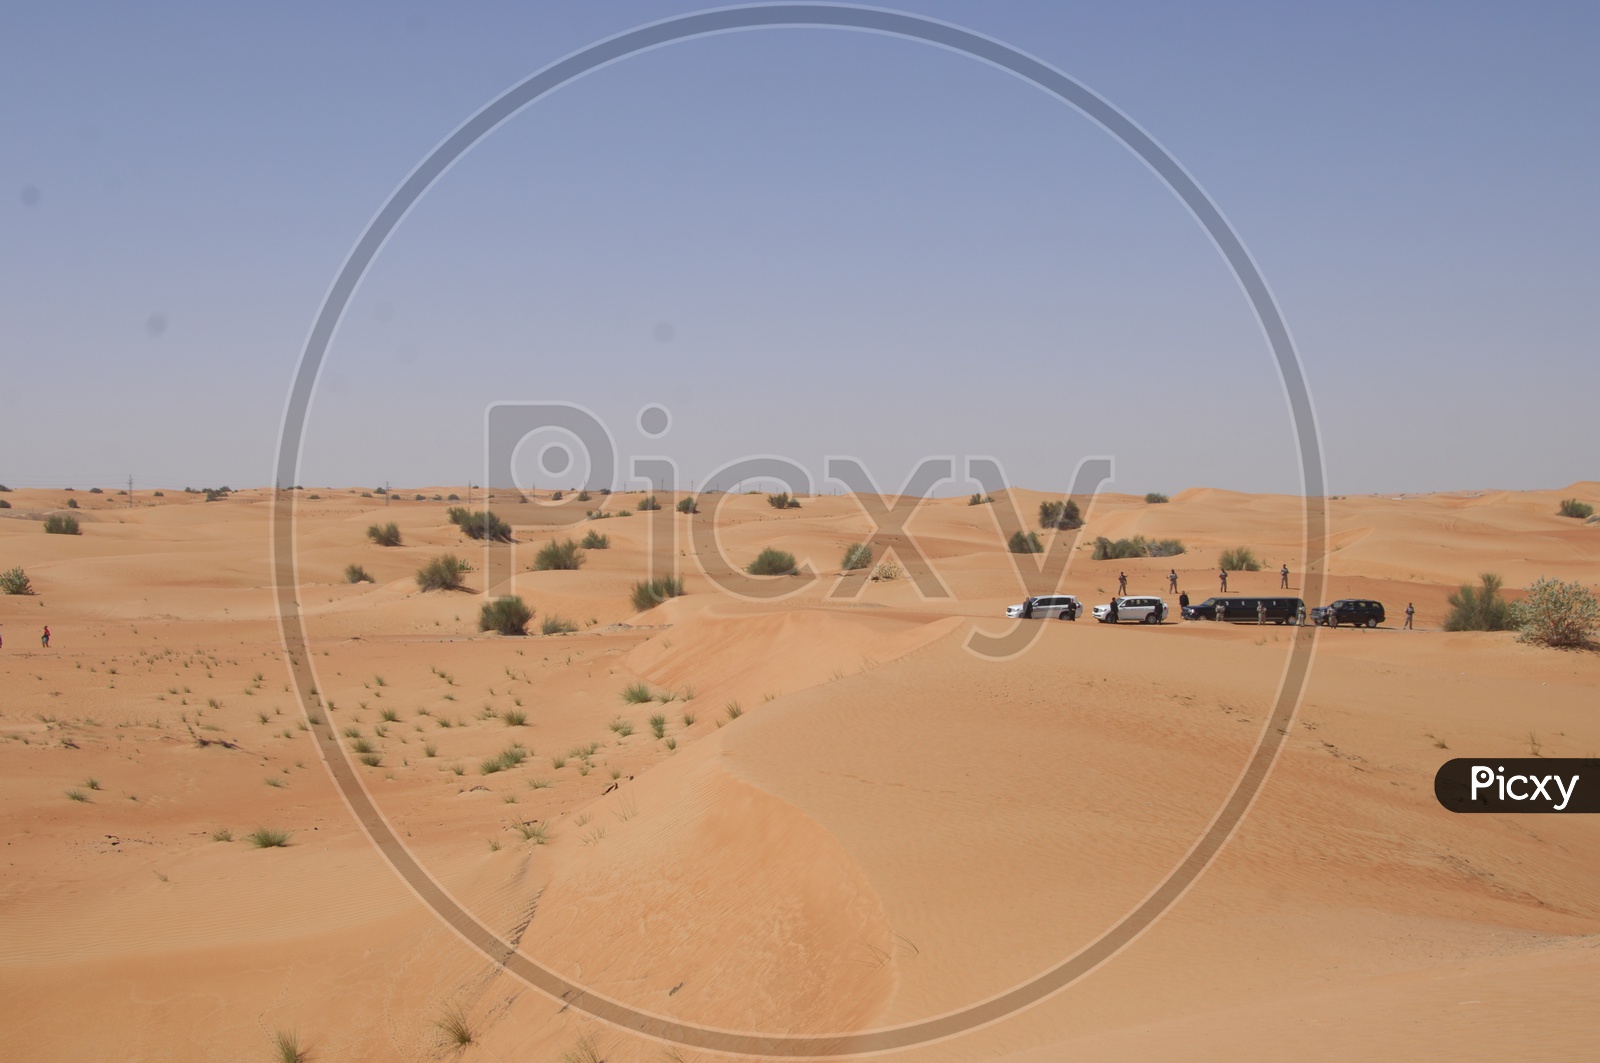 Security Guards With Cars in Desert